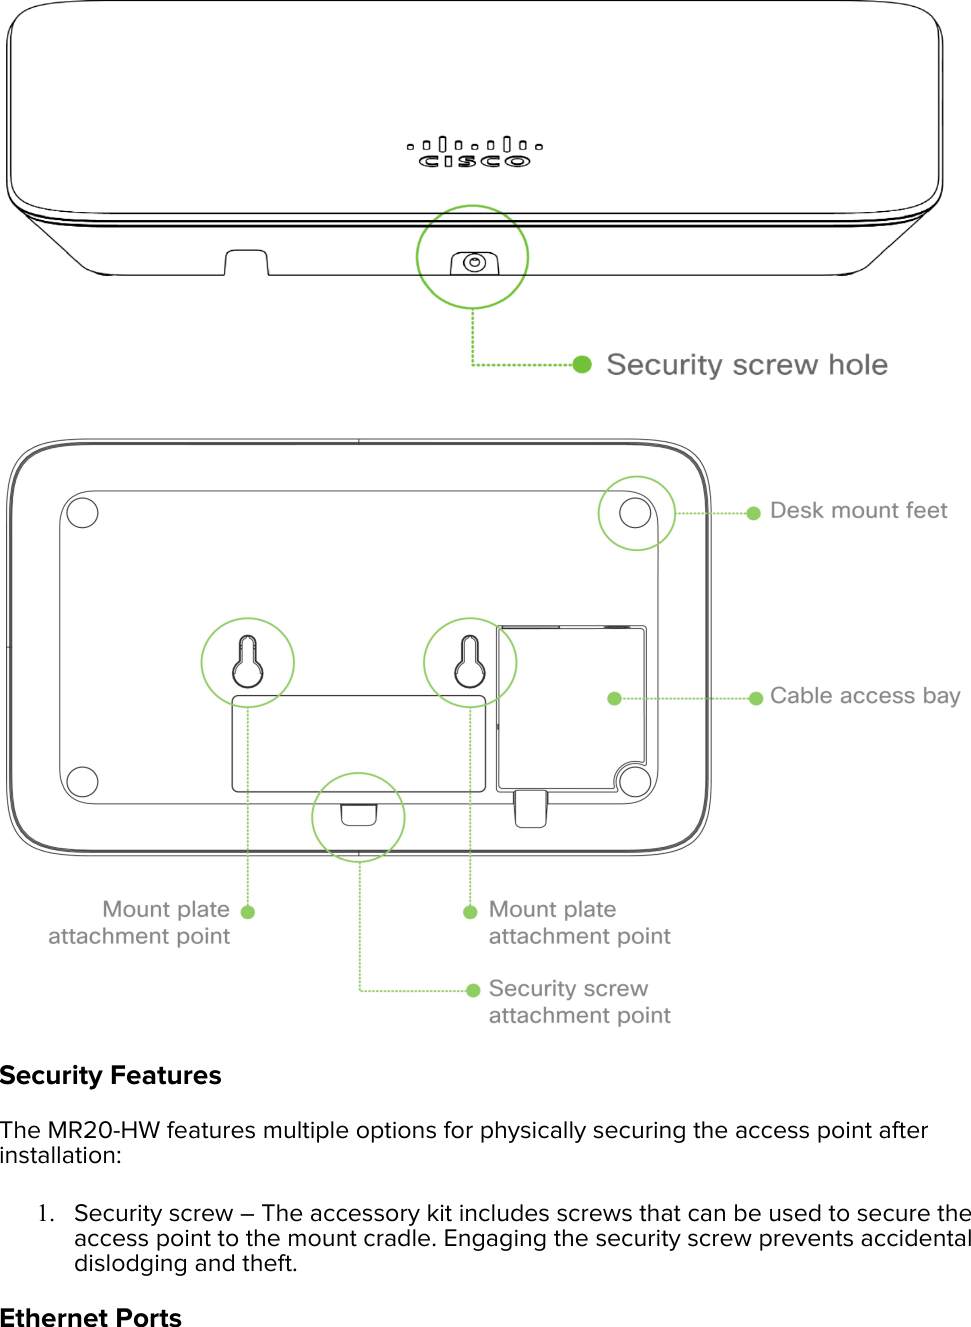   Security Features The MR20-HW features multiple options for physically securing the access point after installation: 1. Security screw – The accessory kit includes screws that can be used to secure the access point to the mount cradle. Engaging the security screw prevents accidental dislodging and theft. Ethernet Ports  